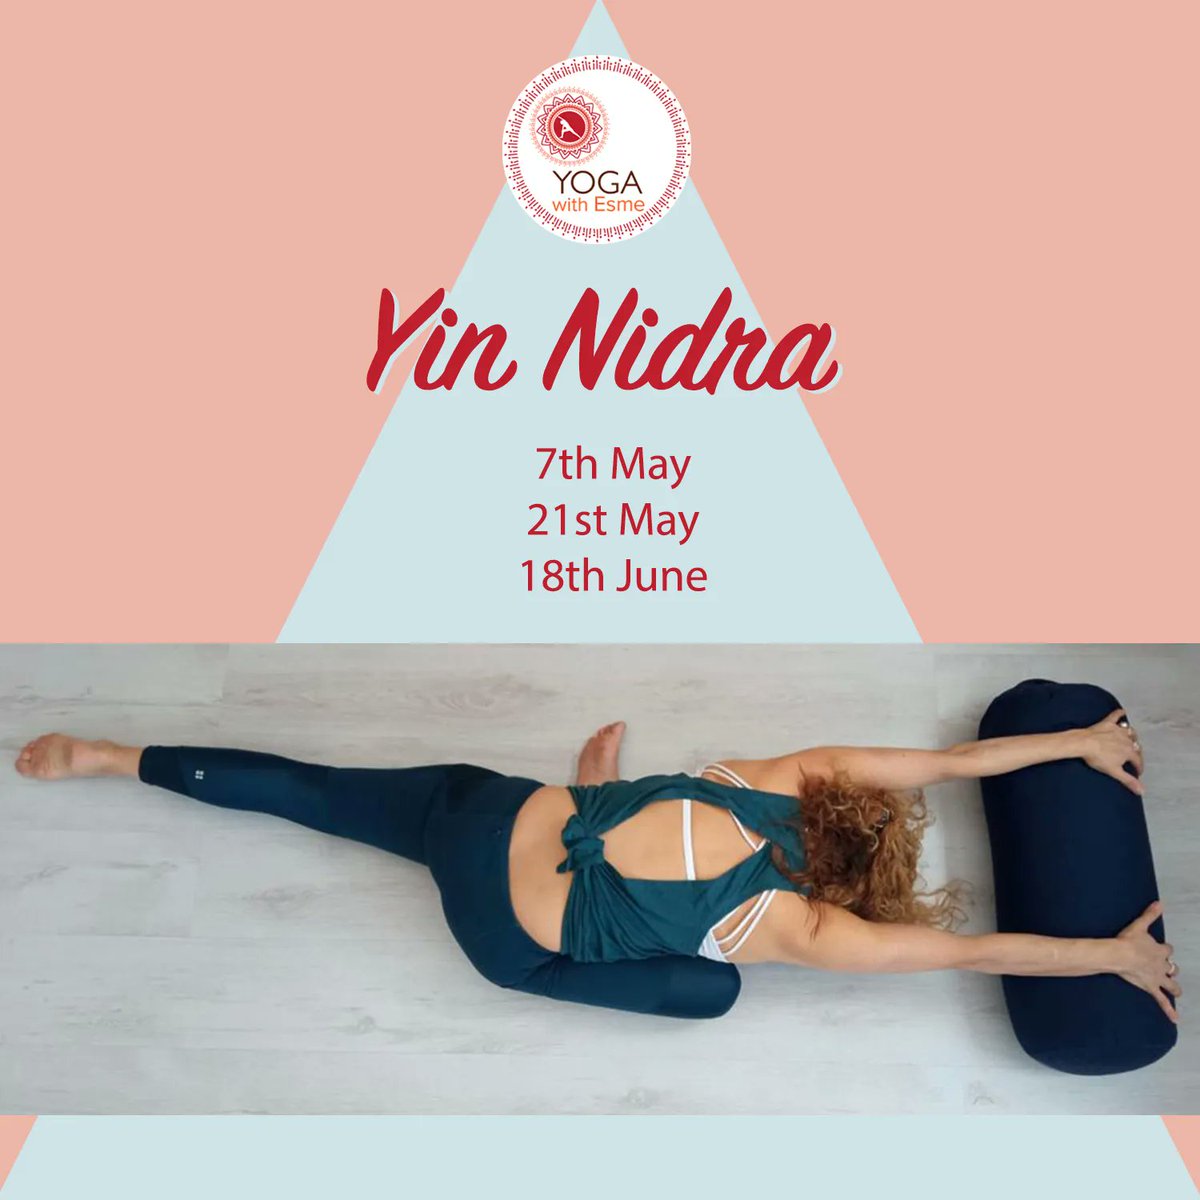 Have you claimed your spot in our new Yin Nidra dates yet?

🙏🏼  7th May
🙏🏿  21st May
🙏🏽  18th June

They’re filling up fast, so get to it!

#YinNidra #Relaxation #StressRelease #Unwind #SelfCare #SelfLove #Yoga #YogaScotland #ThisIsEdinburgh #YogaLife #YogaCommunity #YogaJourney